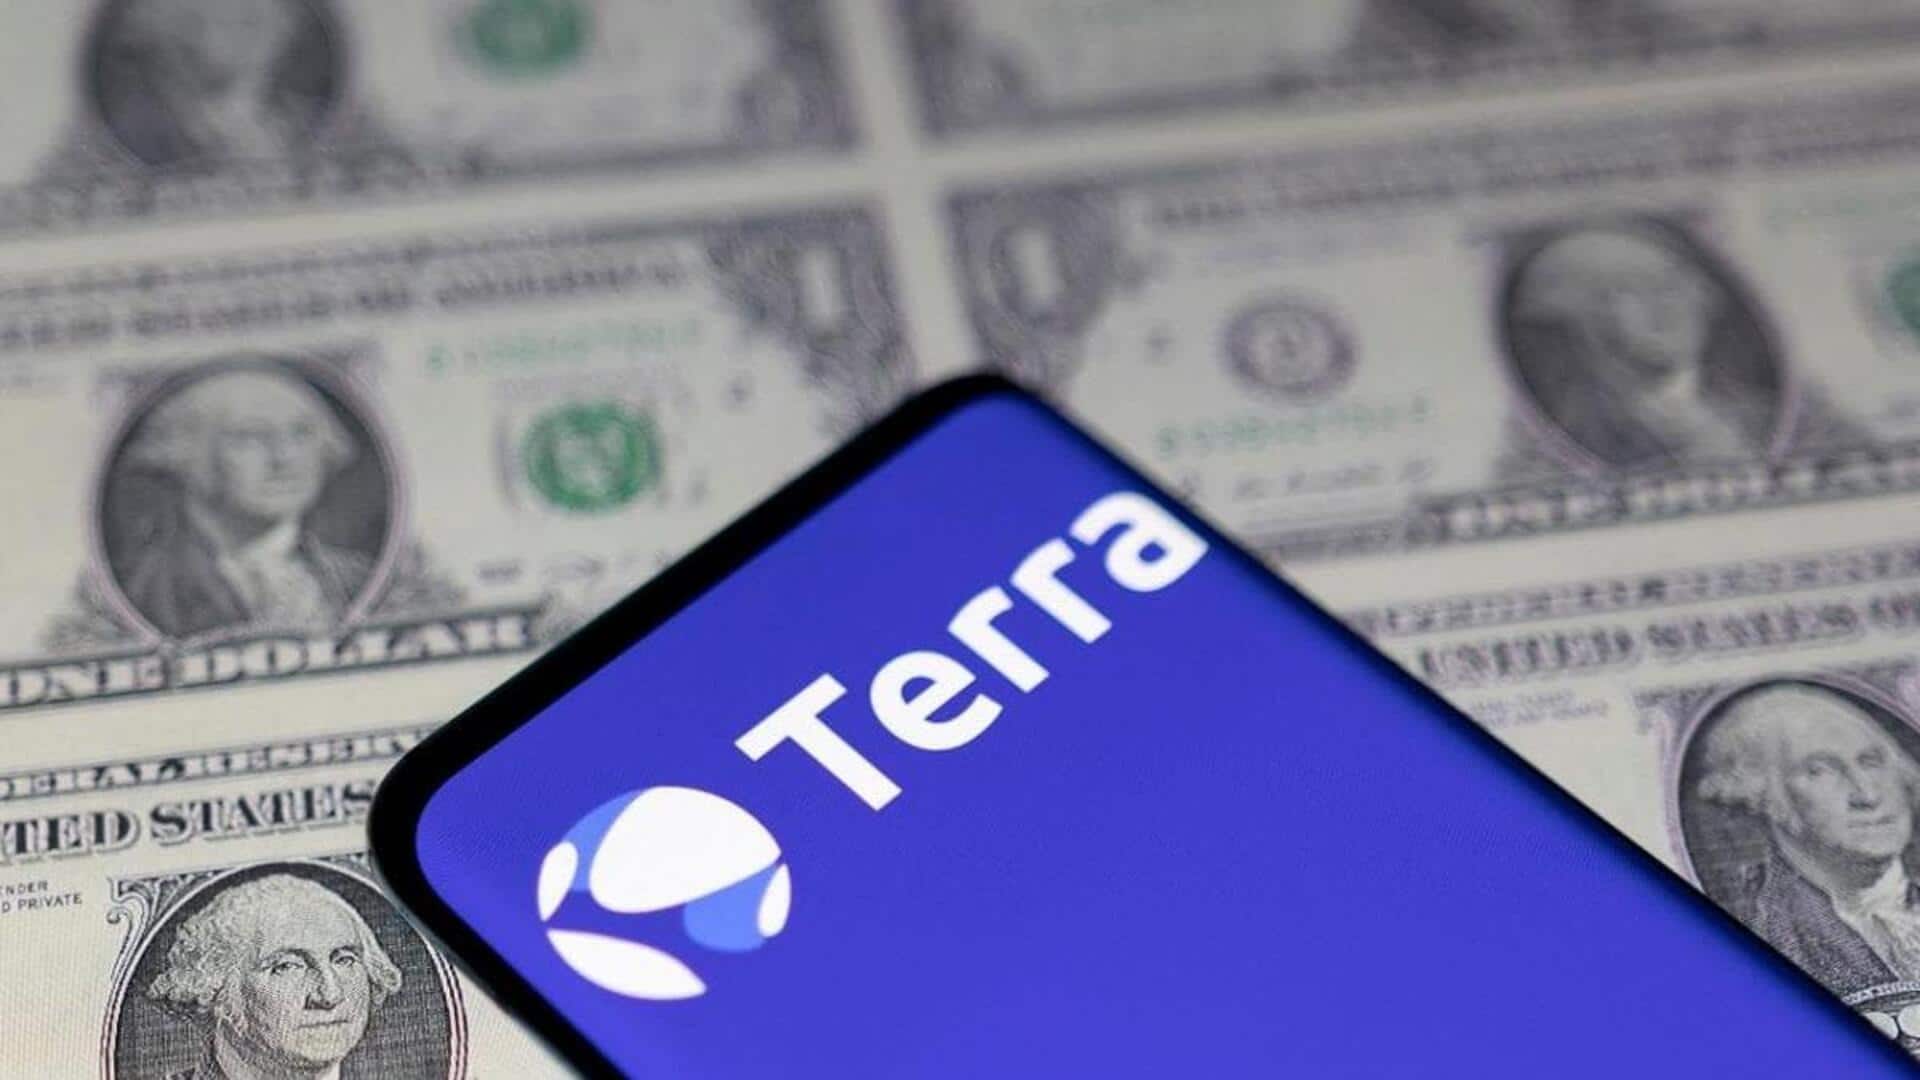 Company behind Terra crypto collapse files for bankruptcy protection